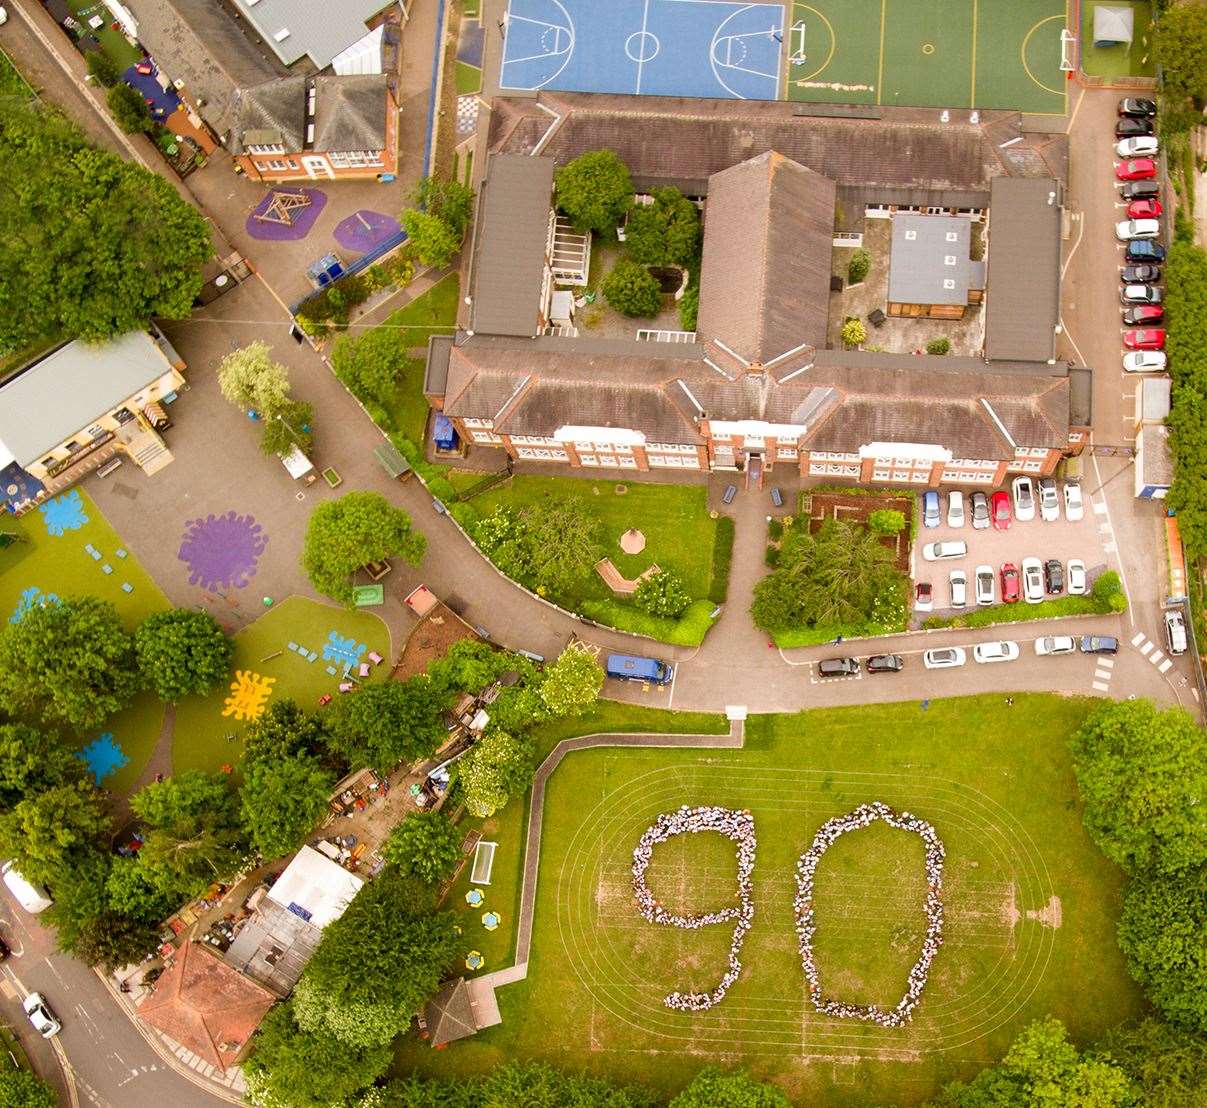 Aerial shot of the school grounds in Gravesend